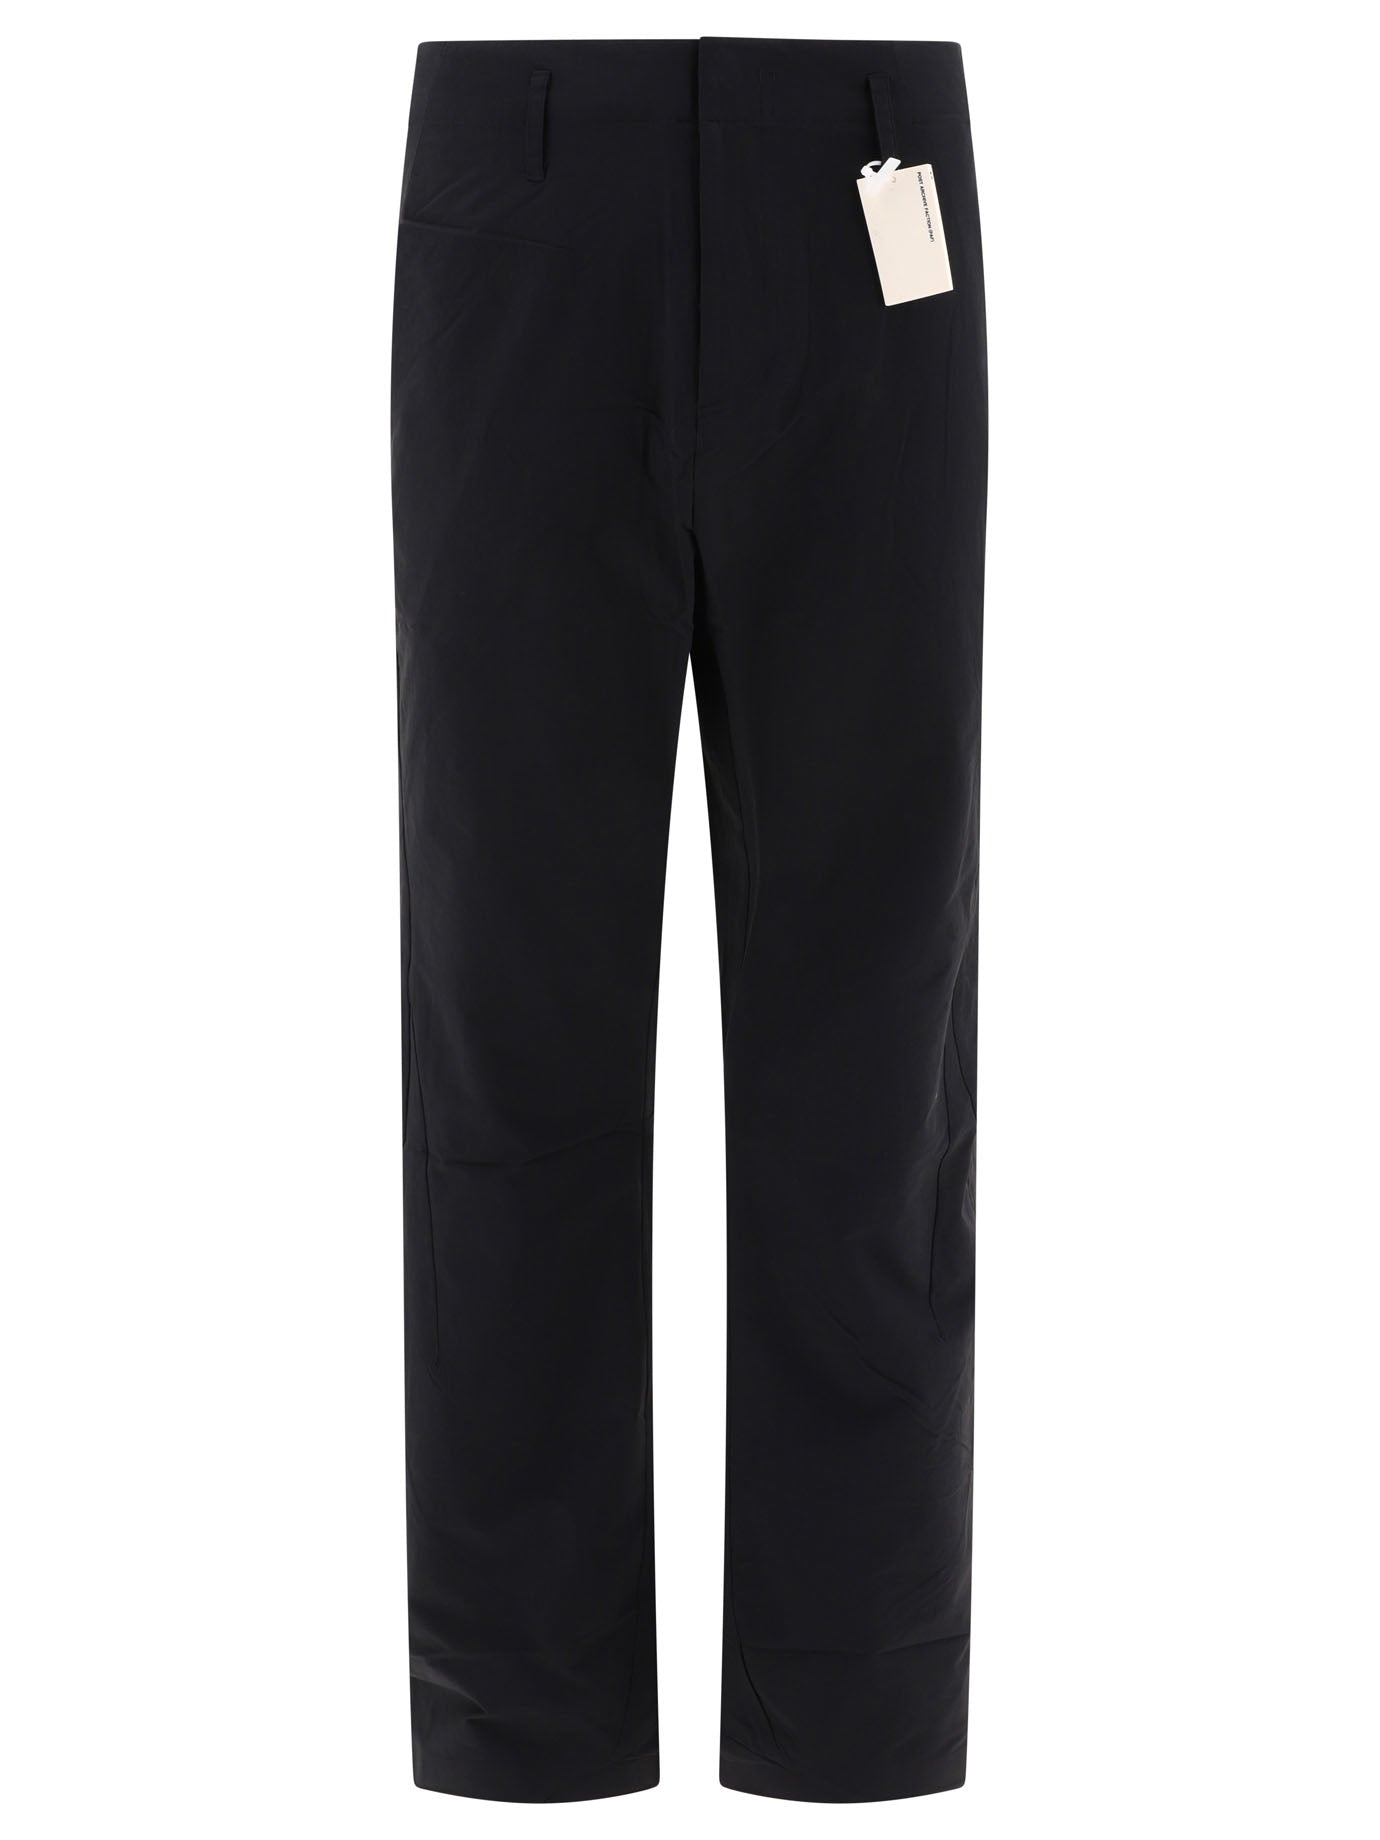 Post Archive Faction (paf) 6.0 Right Trousers Black